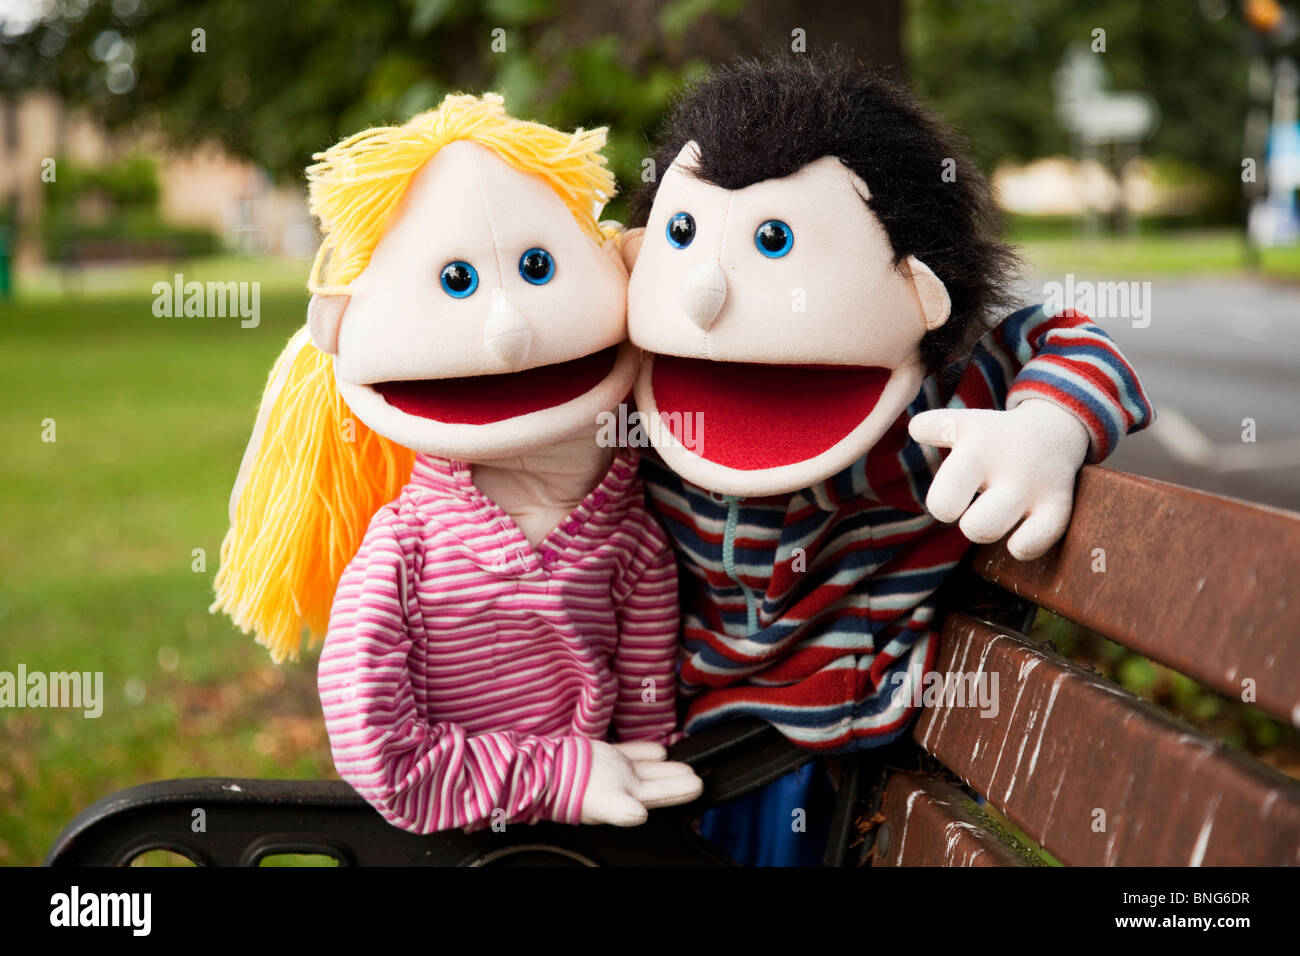 Amusing puppets couple on a park bench. Stock Photo